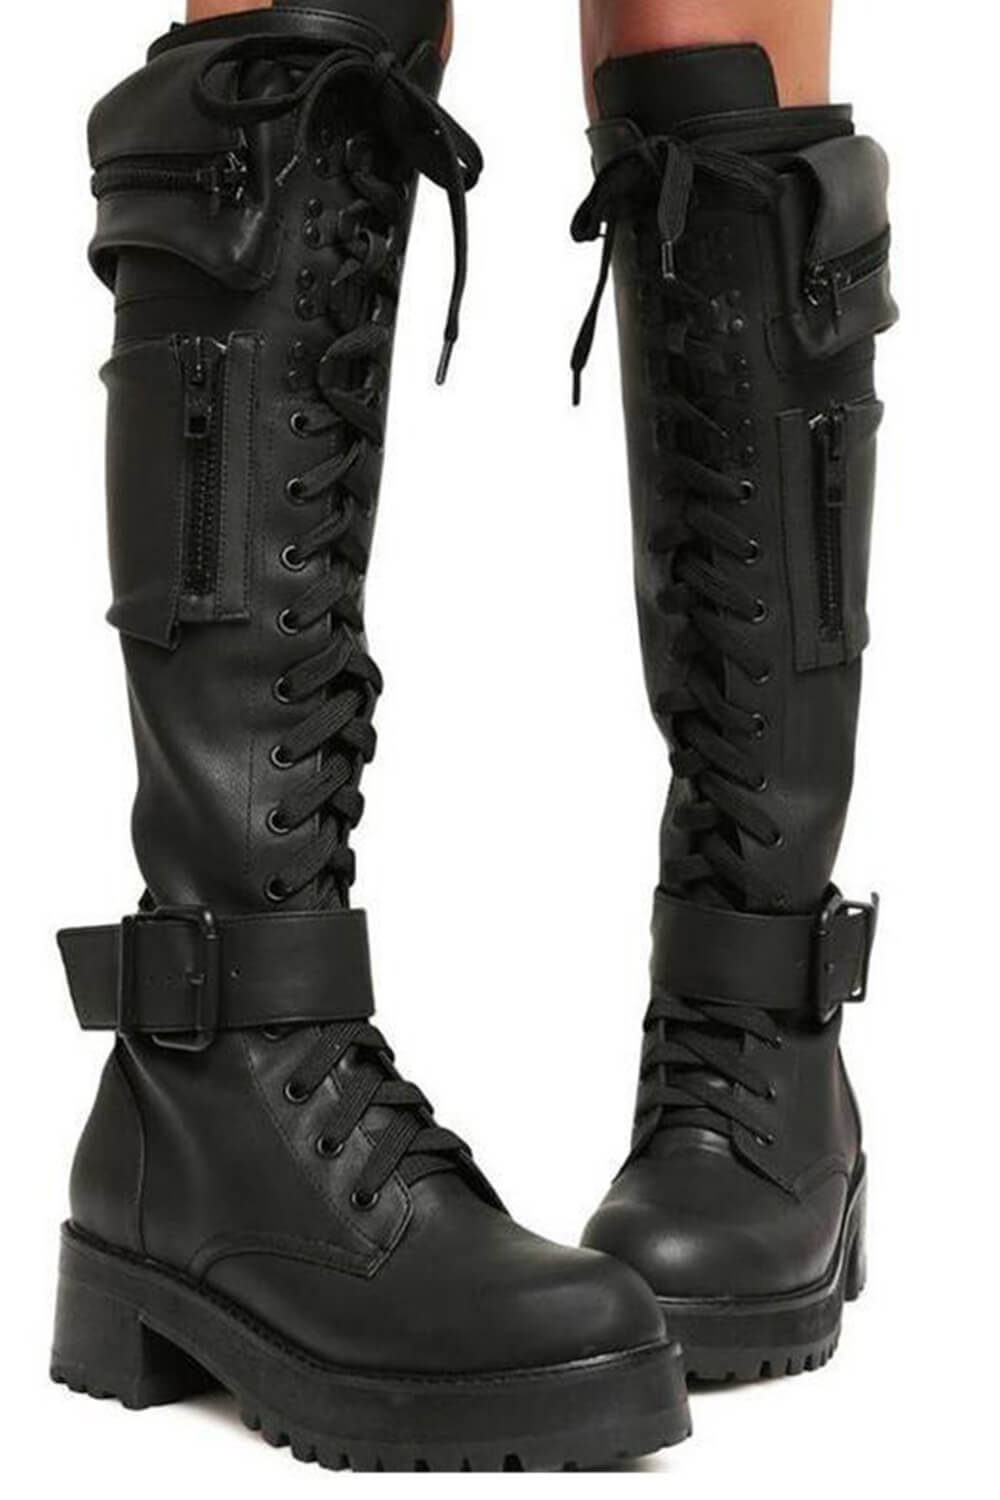 Lace Up Pocket Detail Chunky Knee High Combat Boots - Black